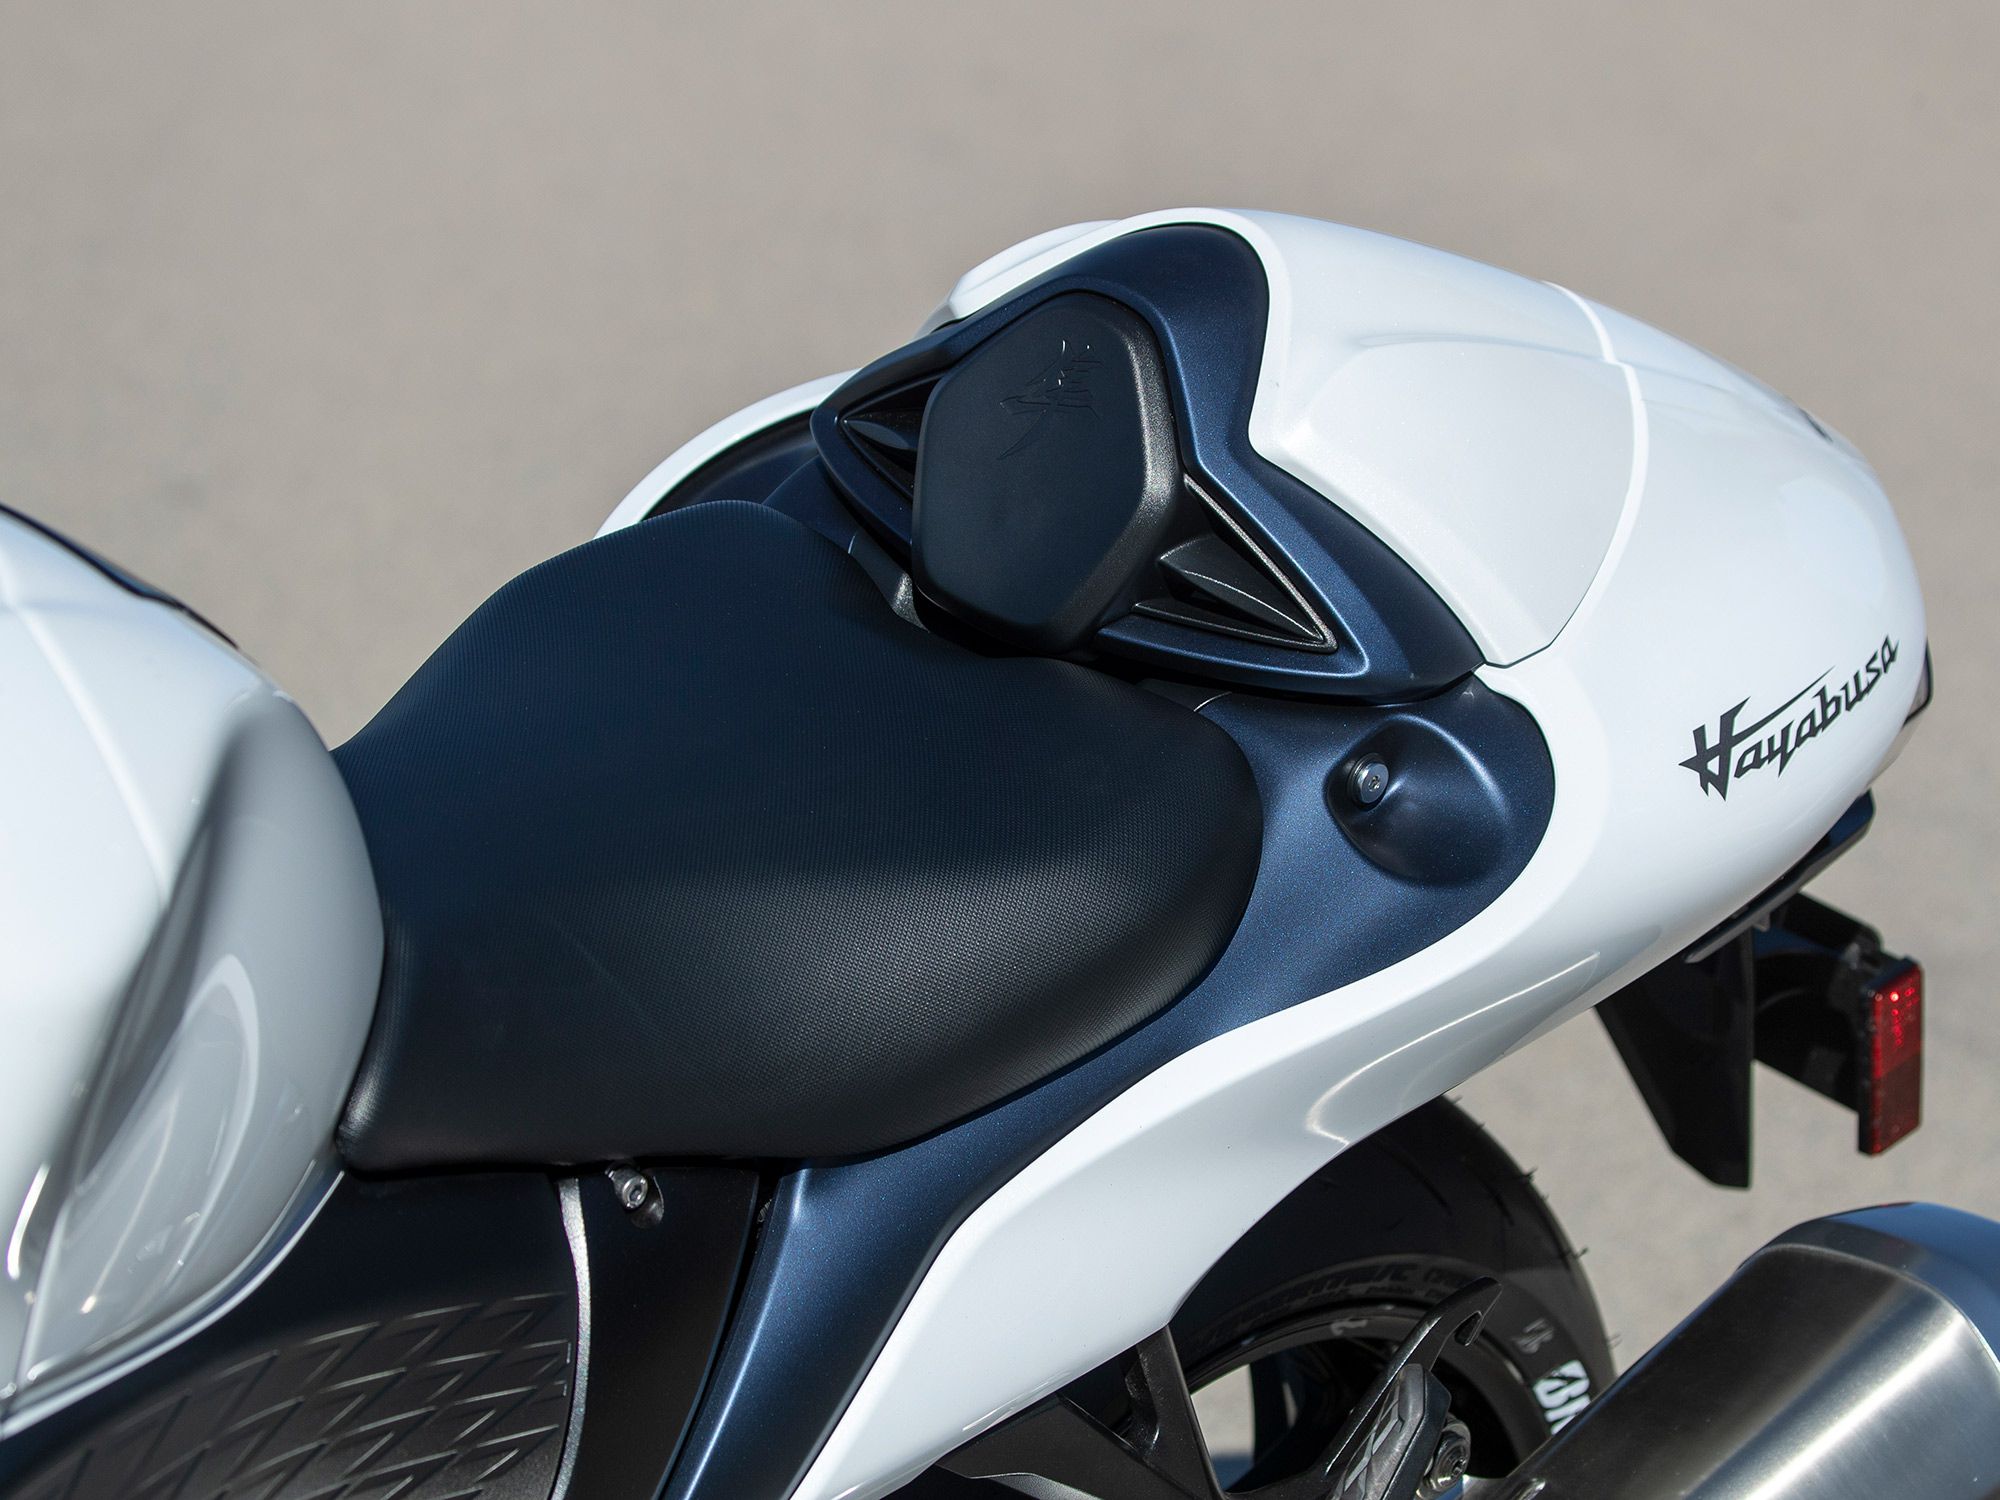 As usual, the Hayabusa sports a comfy rider seat that is well-suited to long days in the saddle.